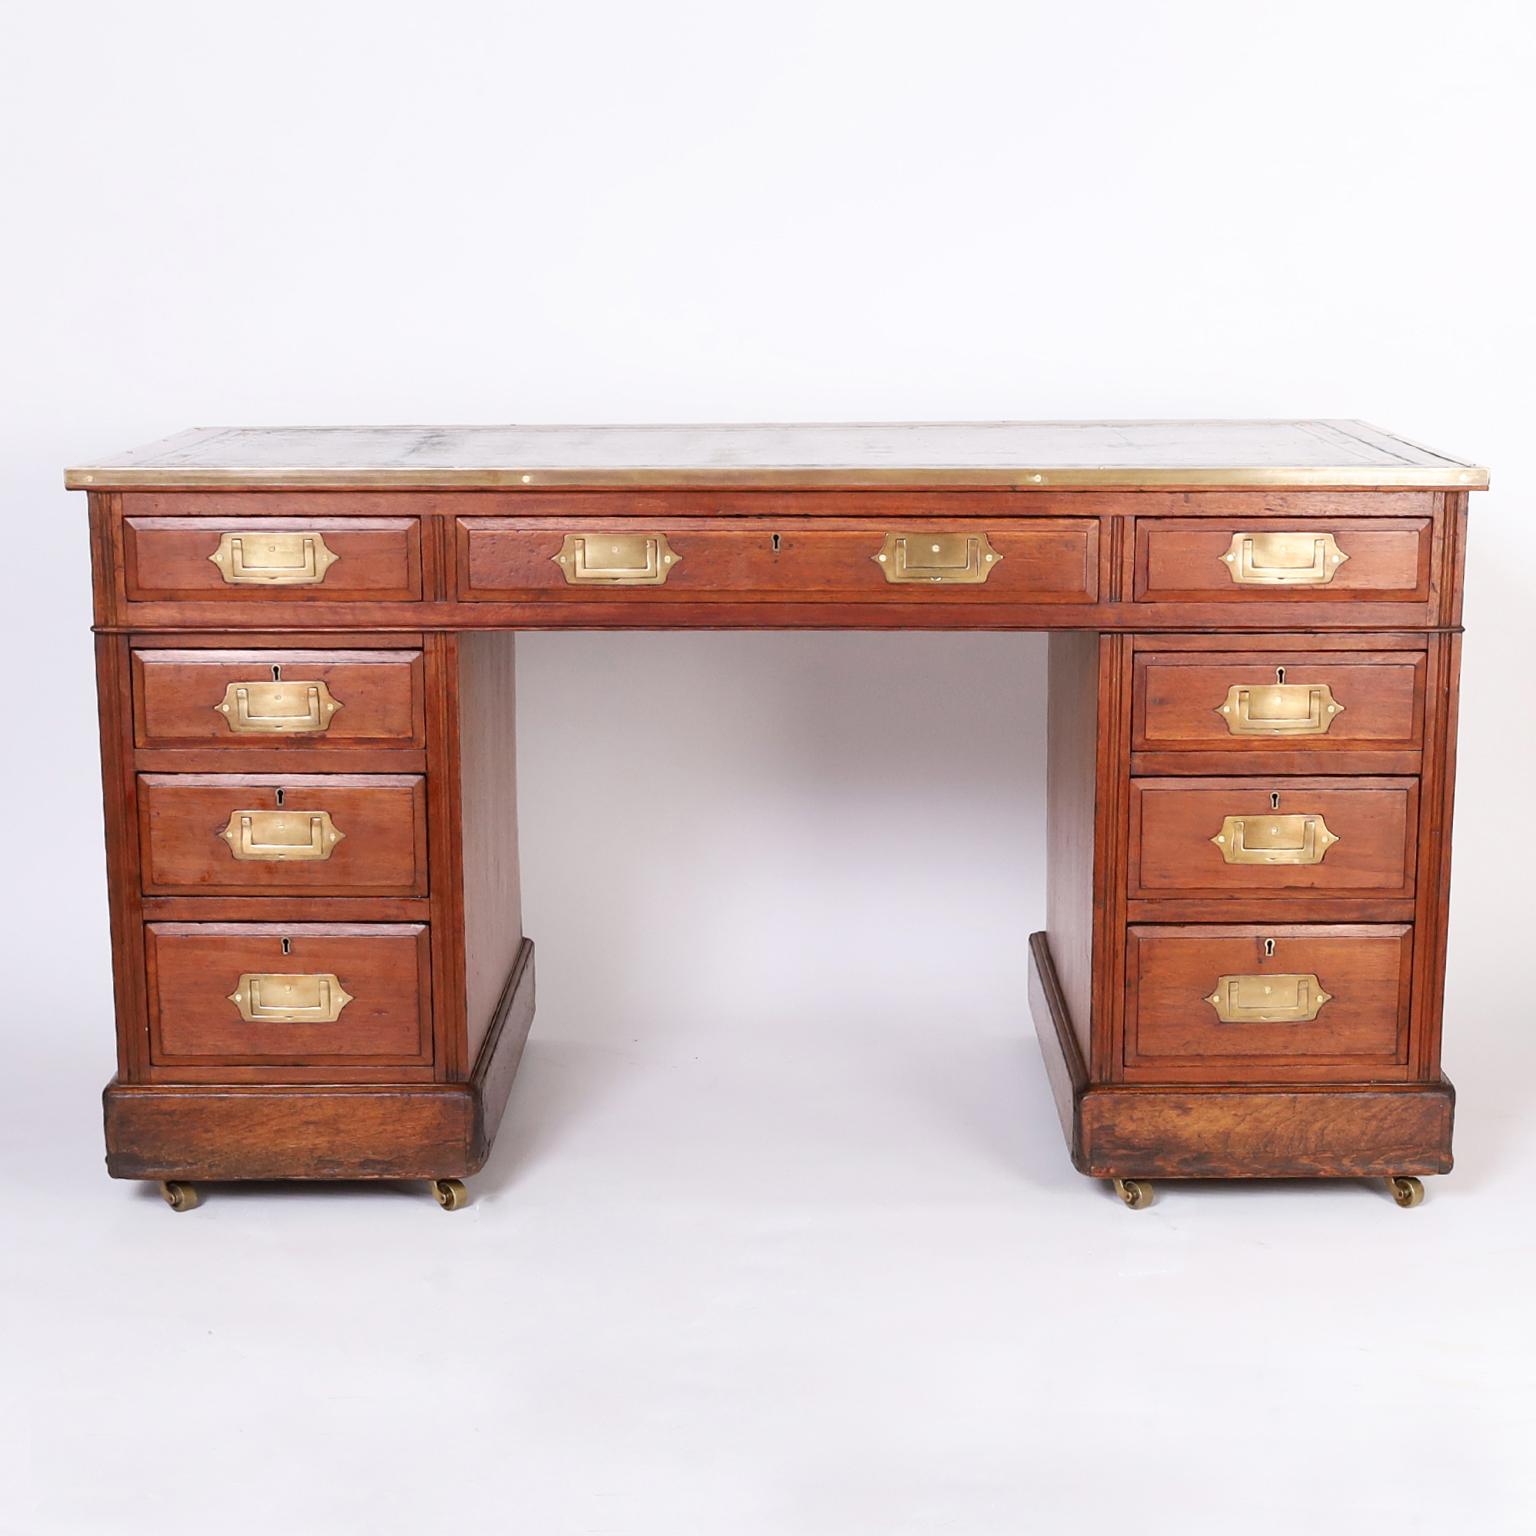 Handsome 19th century English campaign desk featuring the original tooled green leather top, campaign brass hardware, two pedestals and a case with nine paneled drawers and block feet. 

Kneehole measures H: 23.5 W: 25